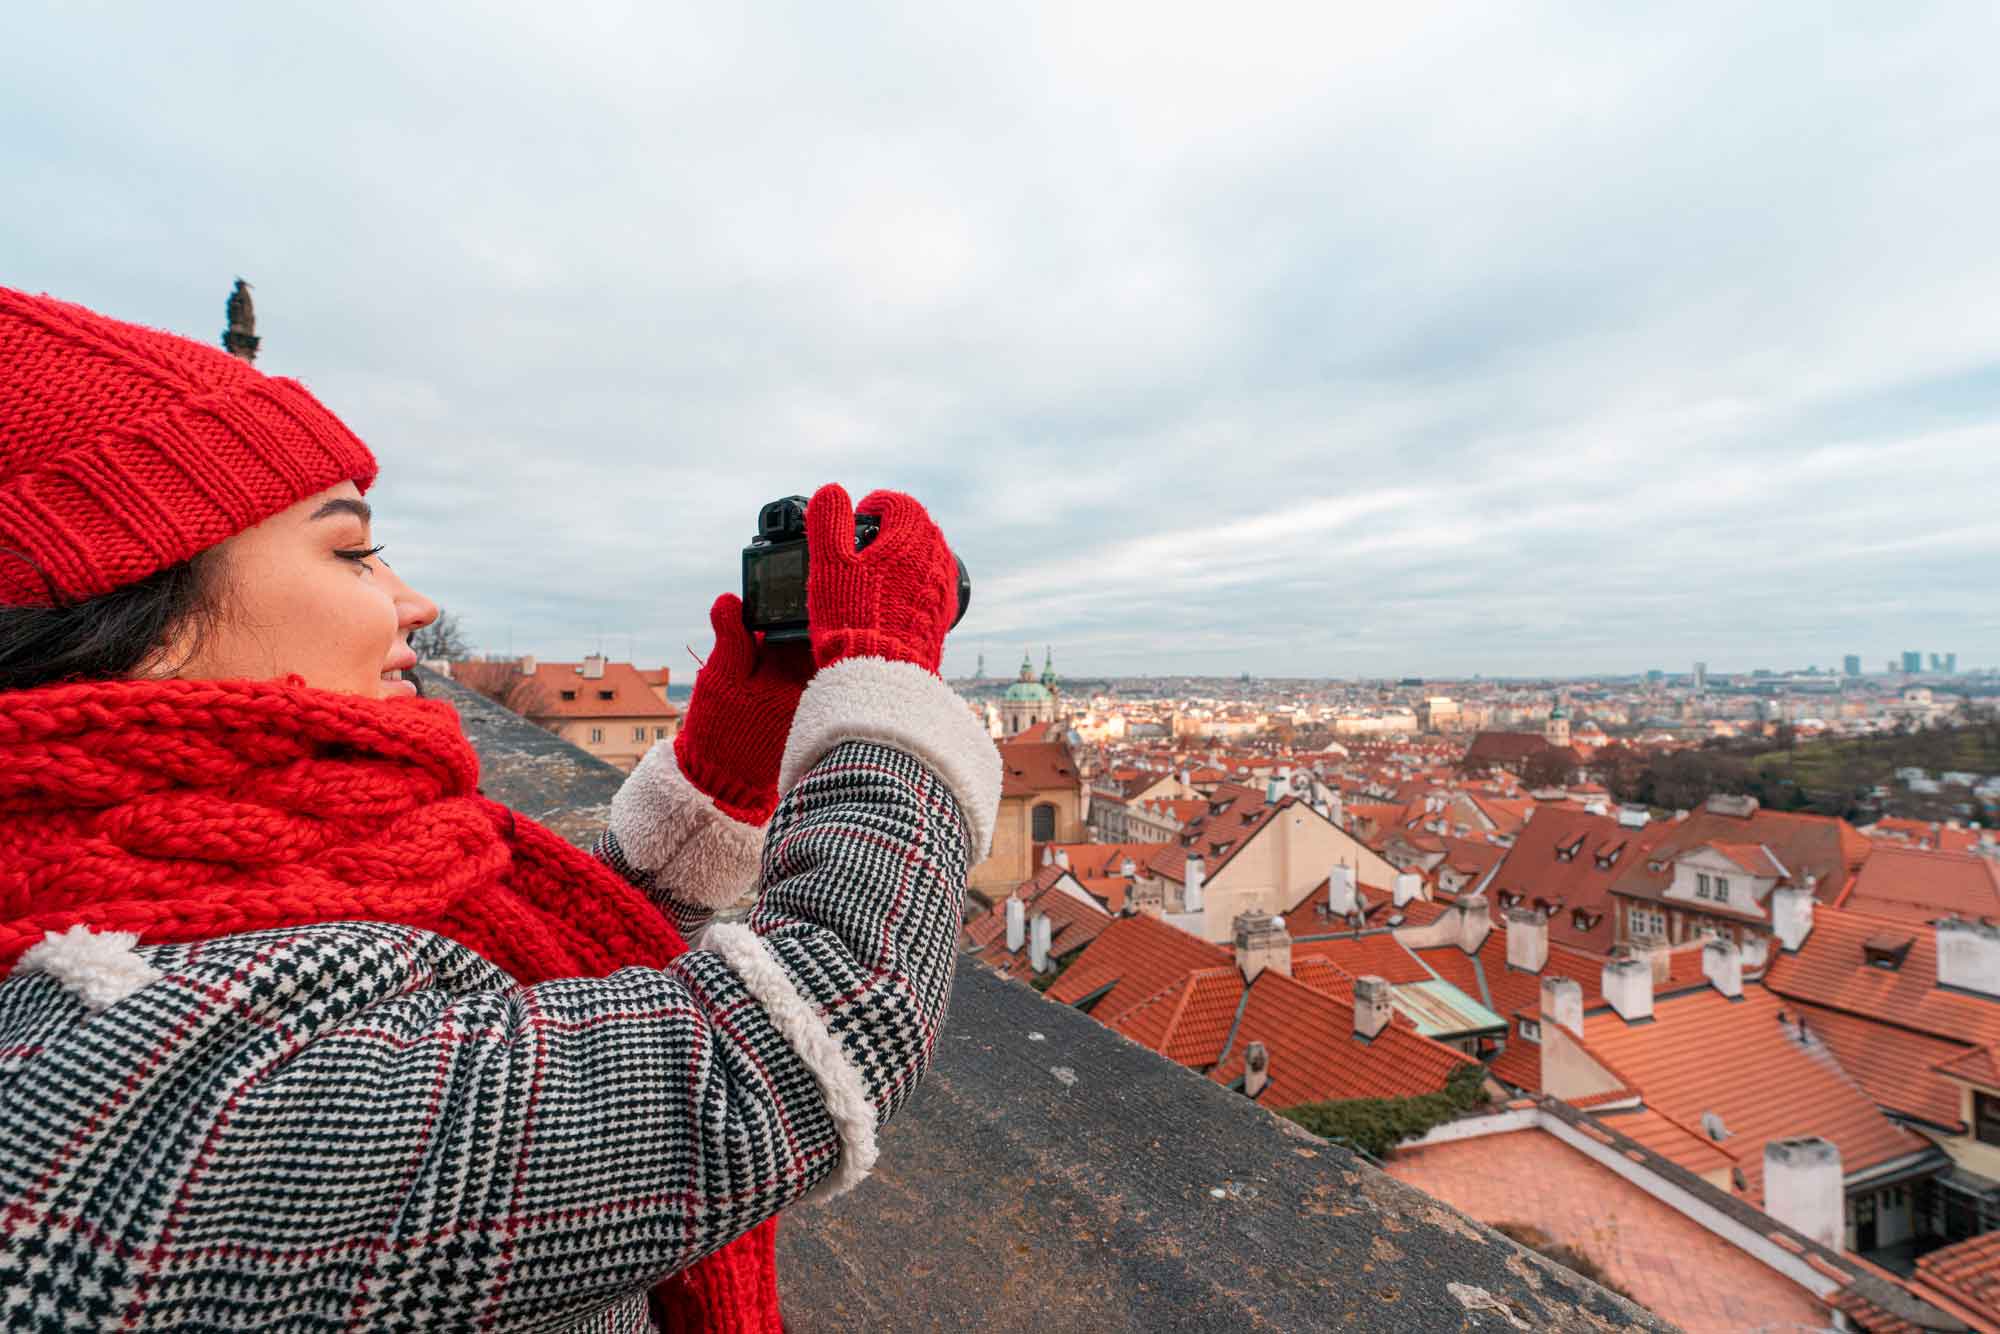 A woman in a red scarf and hat taking photos with a camera on a roof.